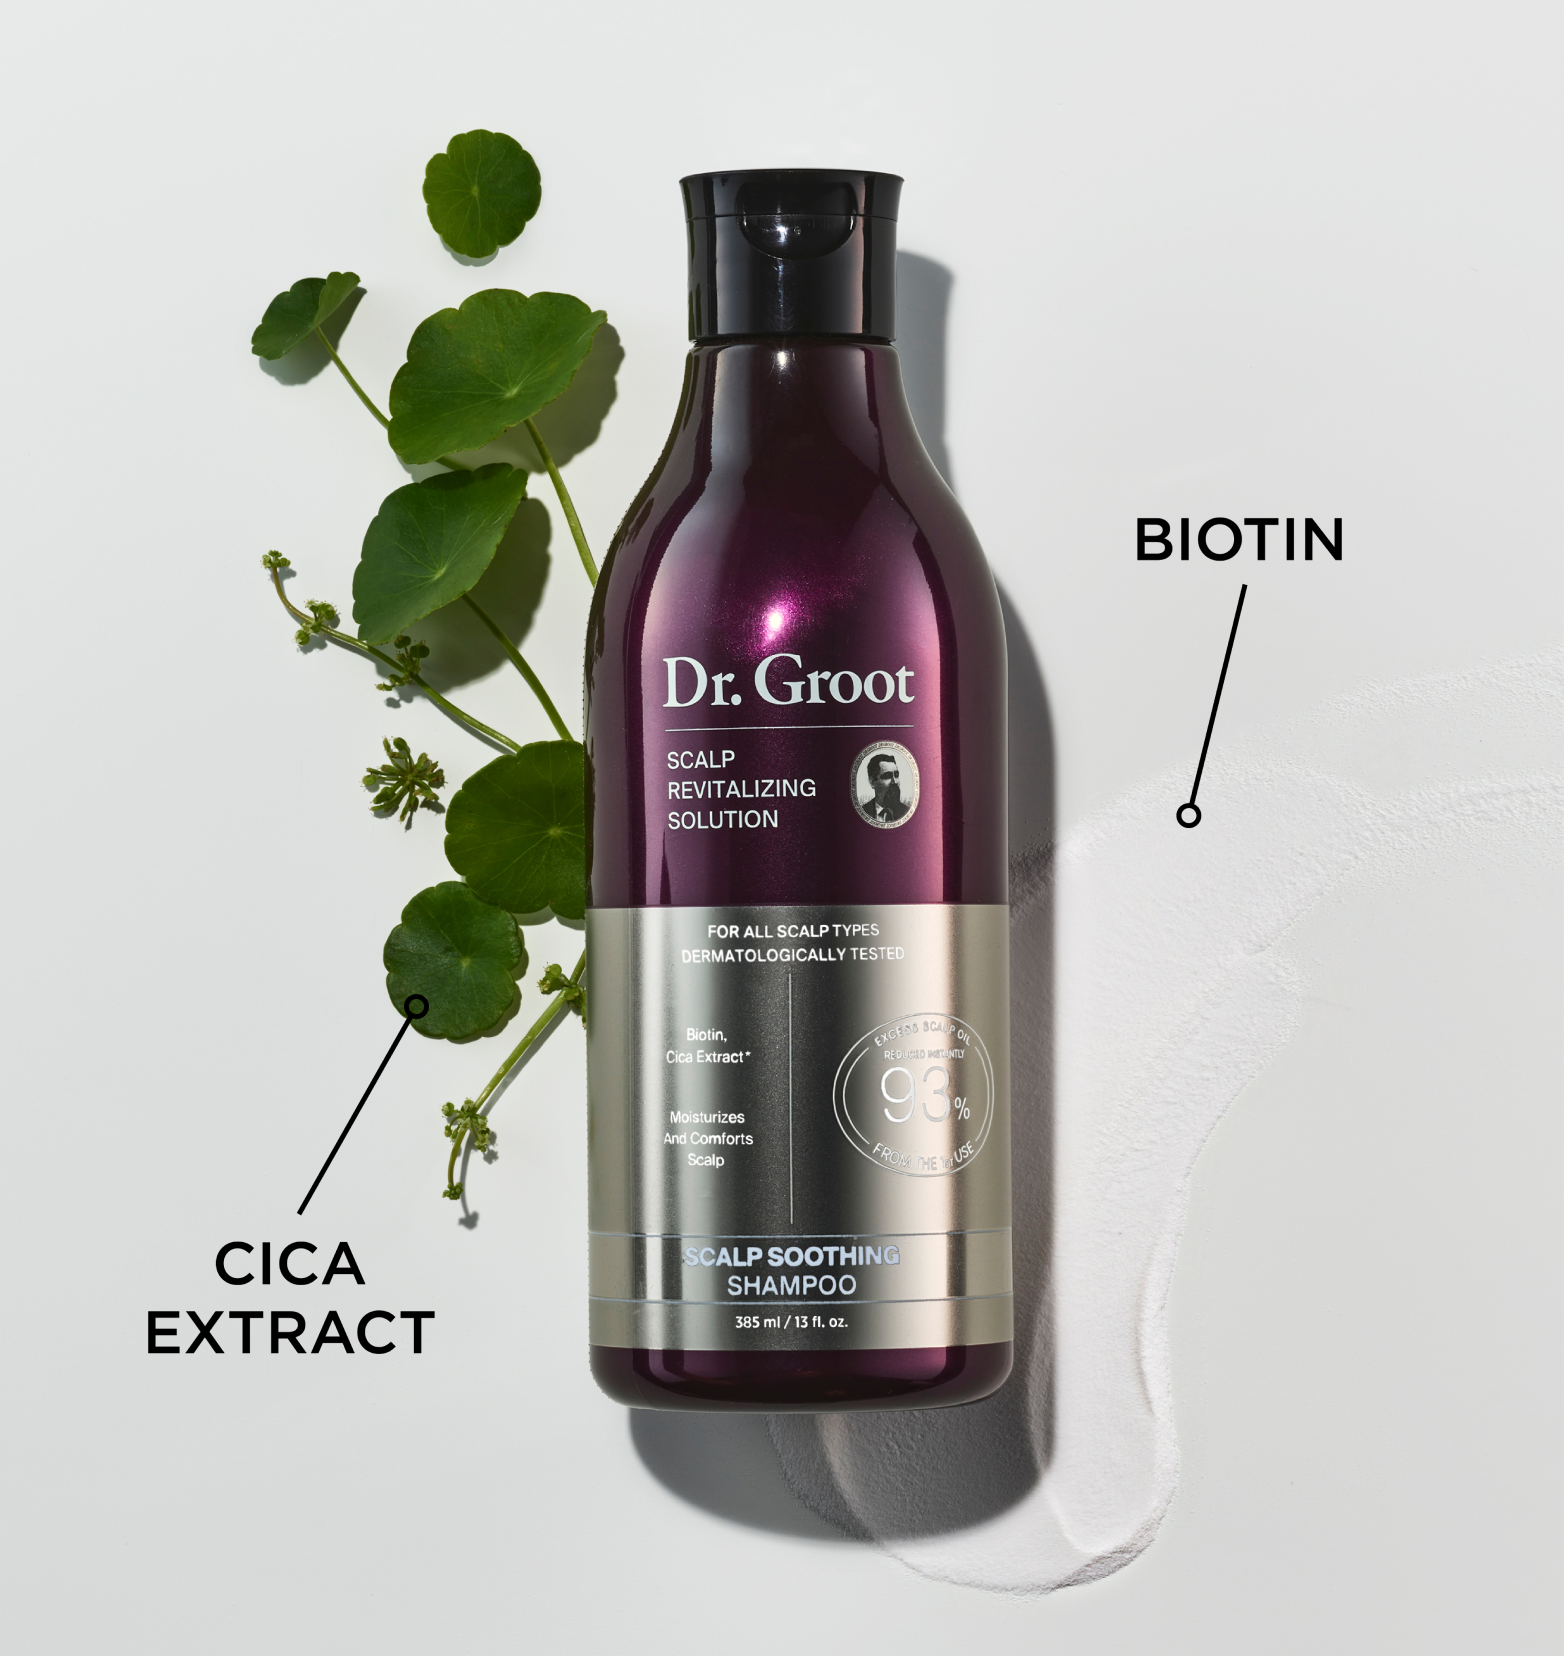 A bottle of Dr. Groot Scalp Soothing Shampoo rests on a spread of cica extract and biotin.